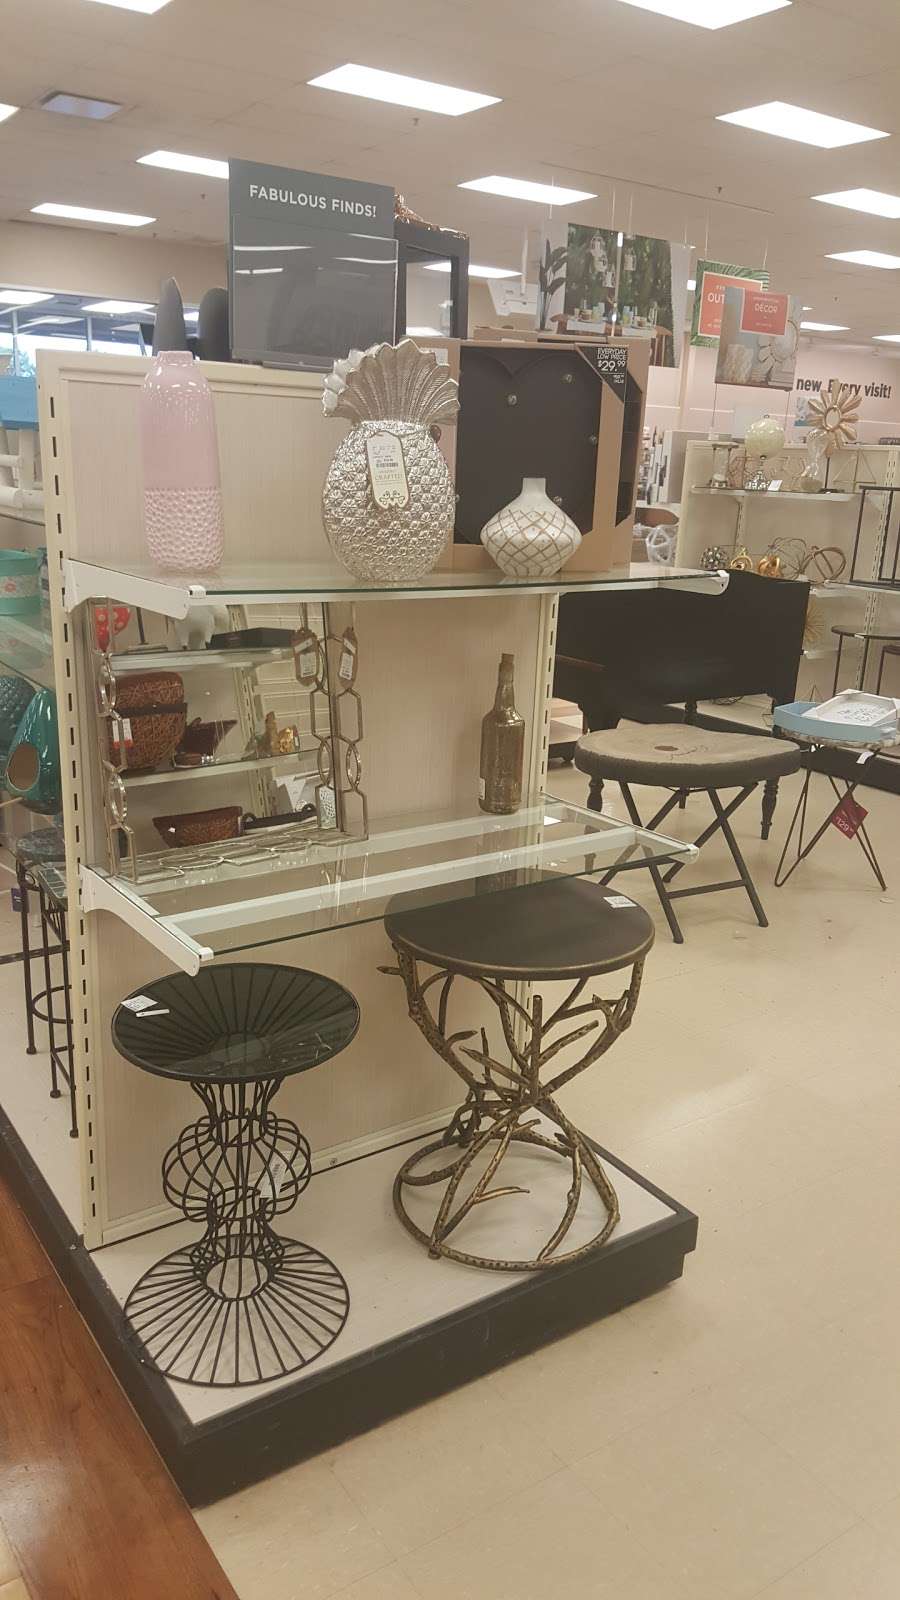 HomeGoods | 7736 Governor Ritchie Hwy, Glen Burnie, MD 21061, USA | Phone: (410) 761-9466